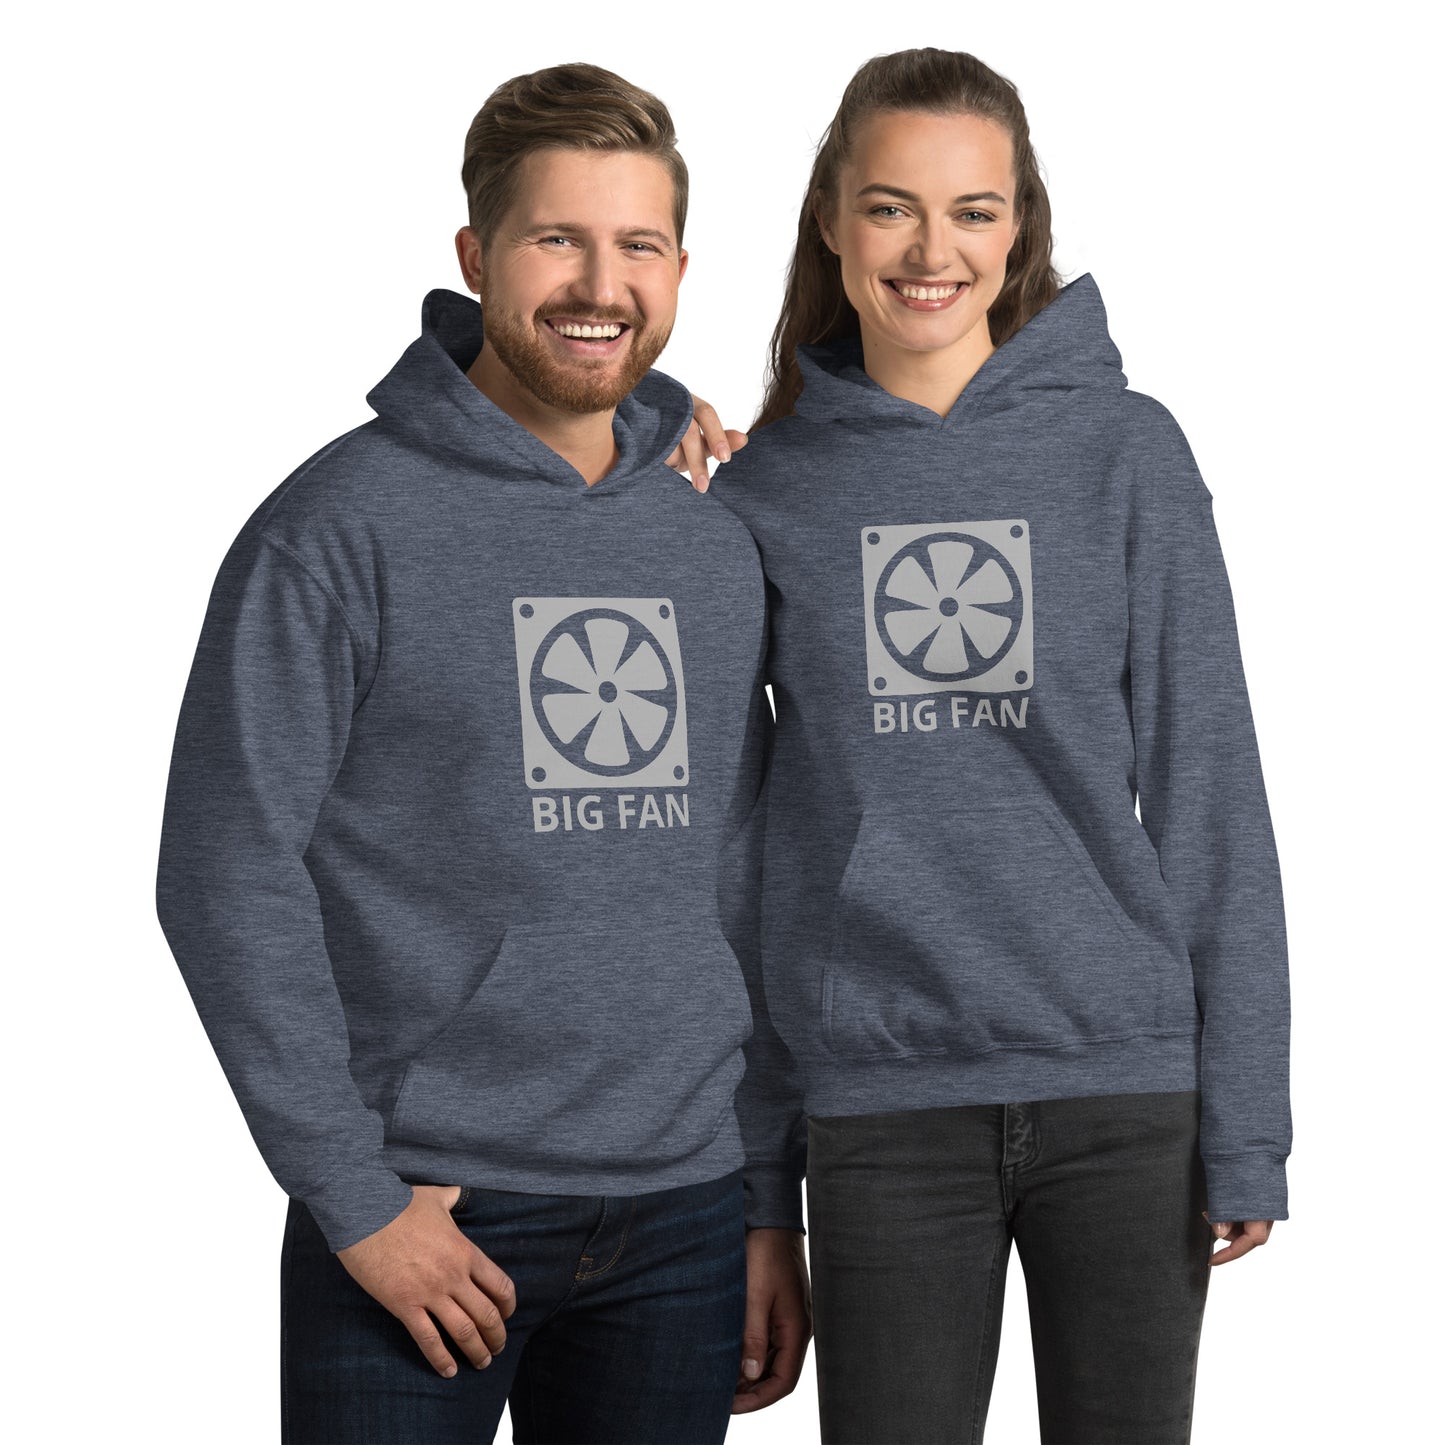 Man and women with dark navy blue hoodie with image of a big computer fan and the text "BIG FAN"